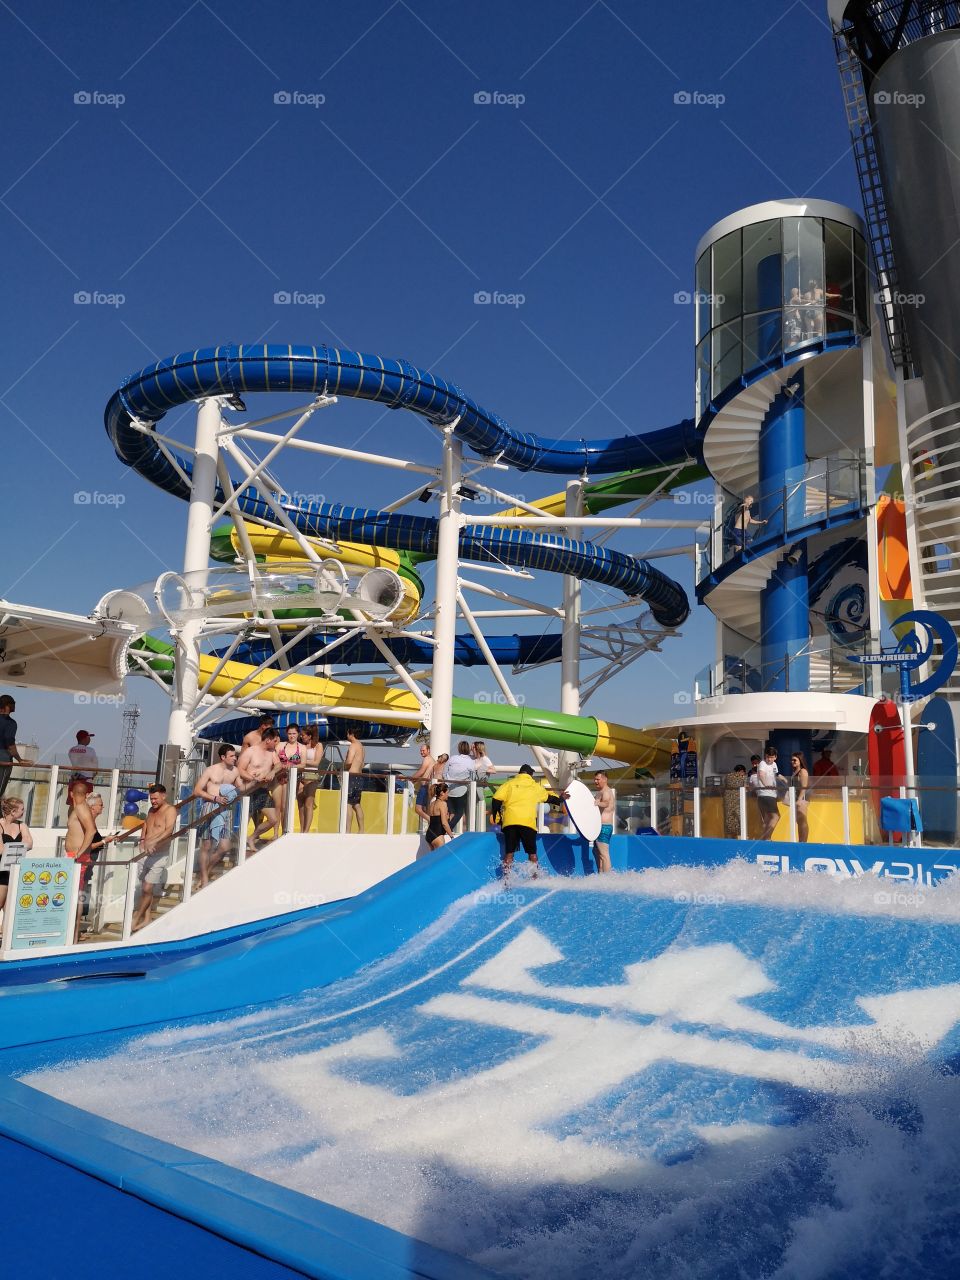 Water slide and flow rider on Independence of the seas.